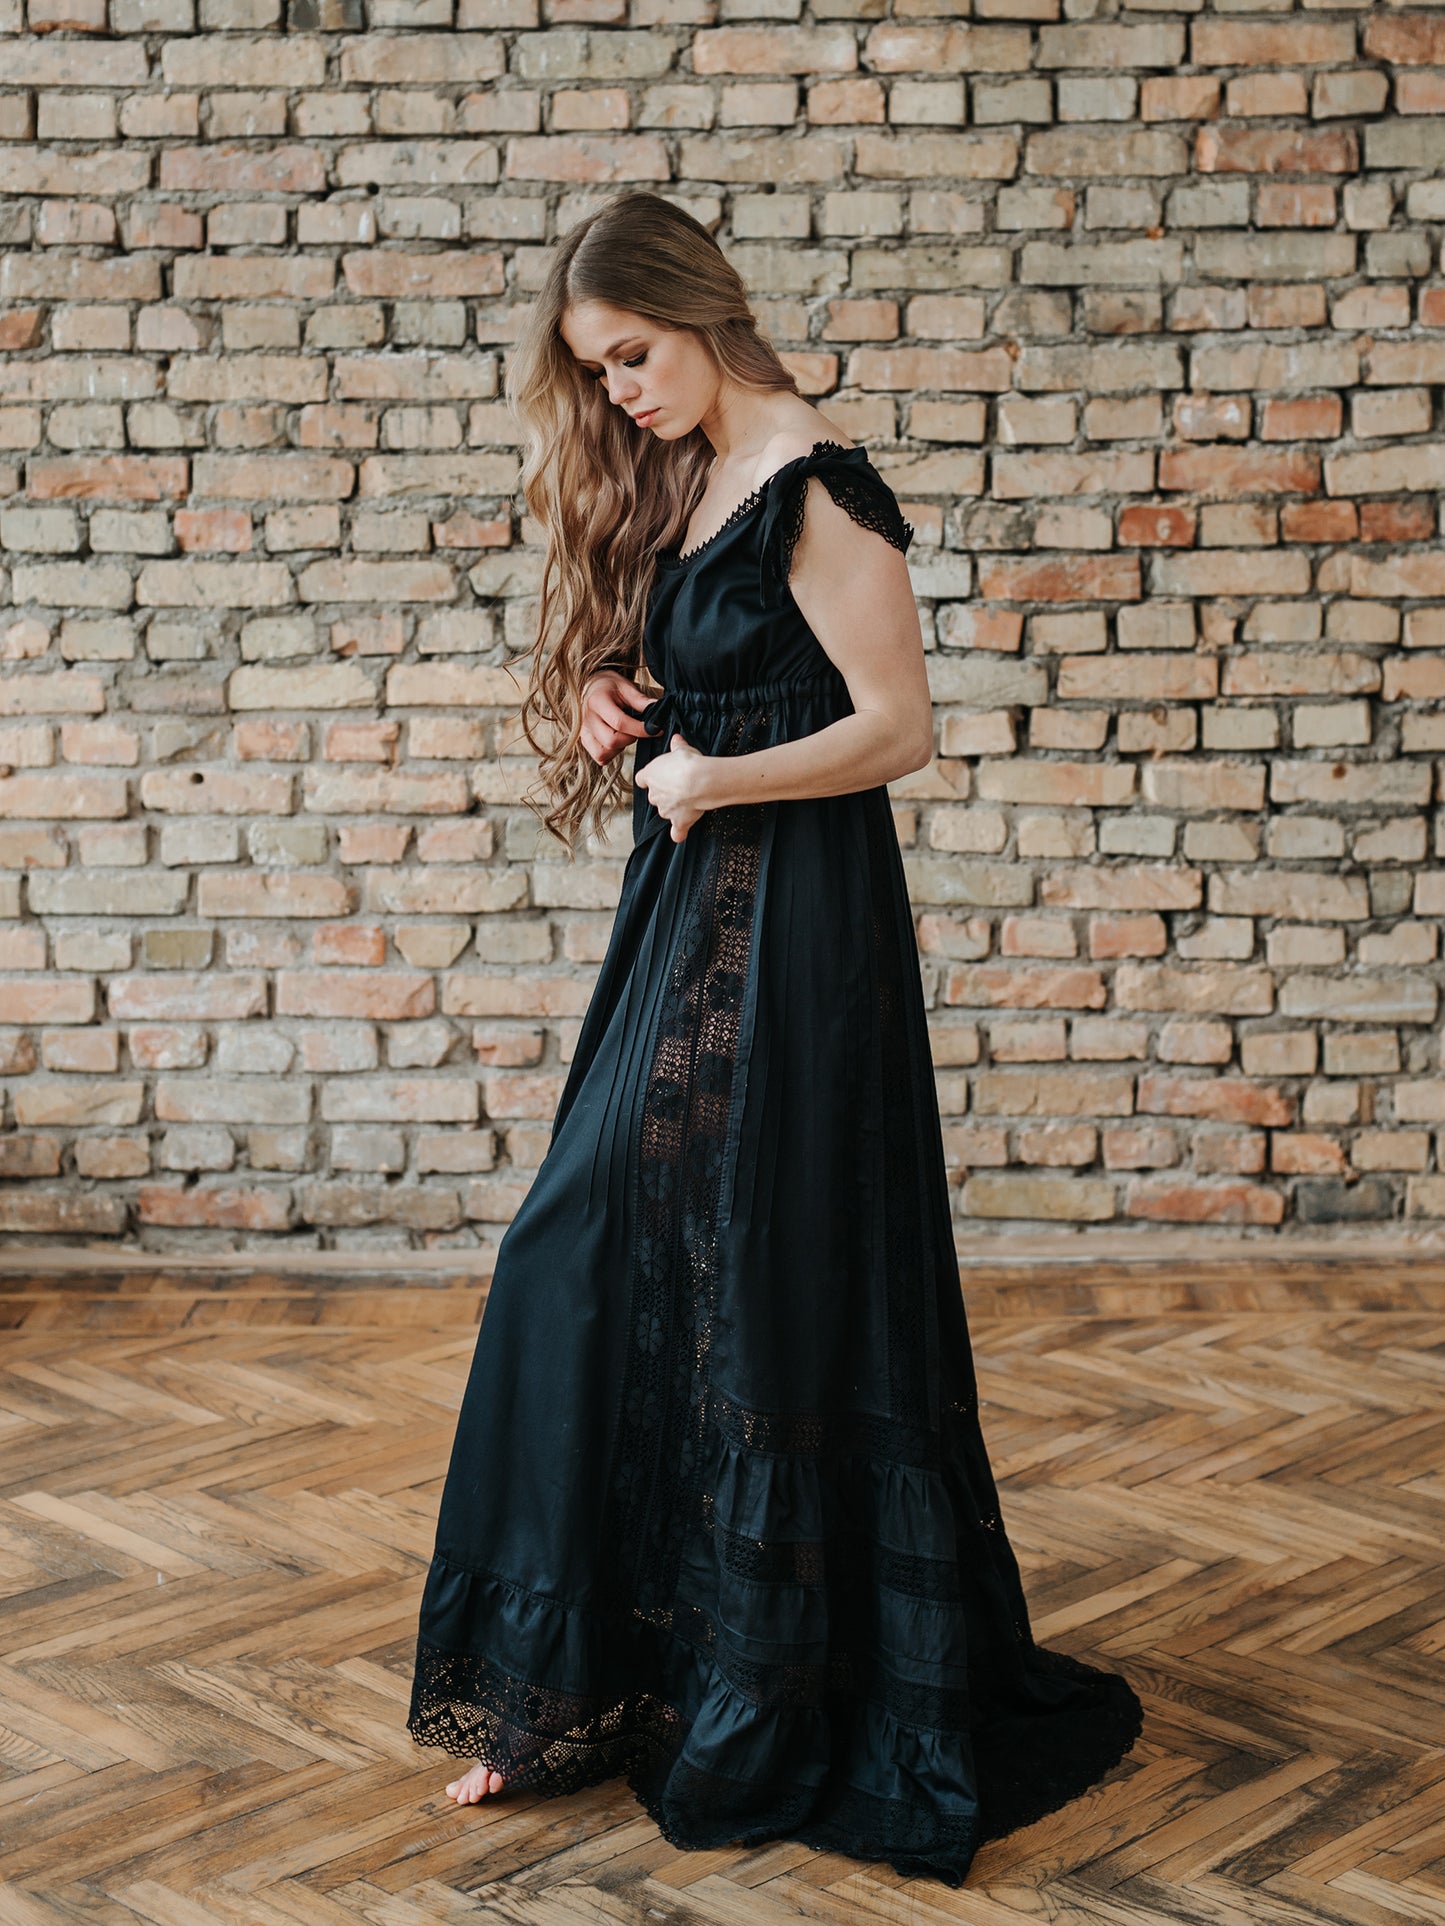 Delicate Beauty - Victorian Inspired Night Gown in Black Cotton